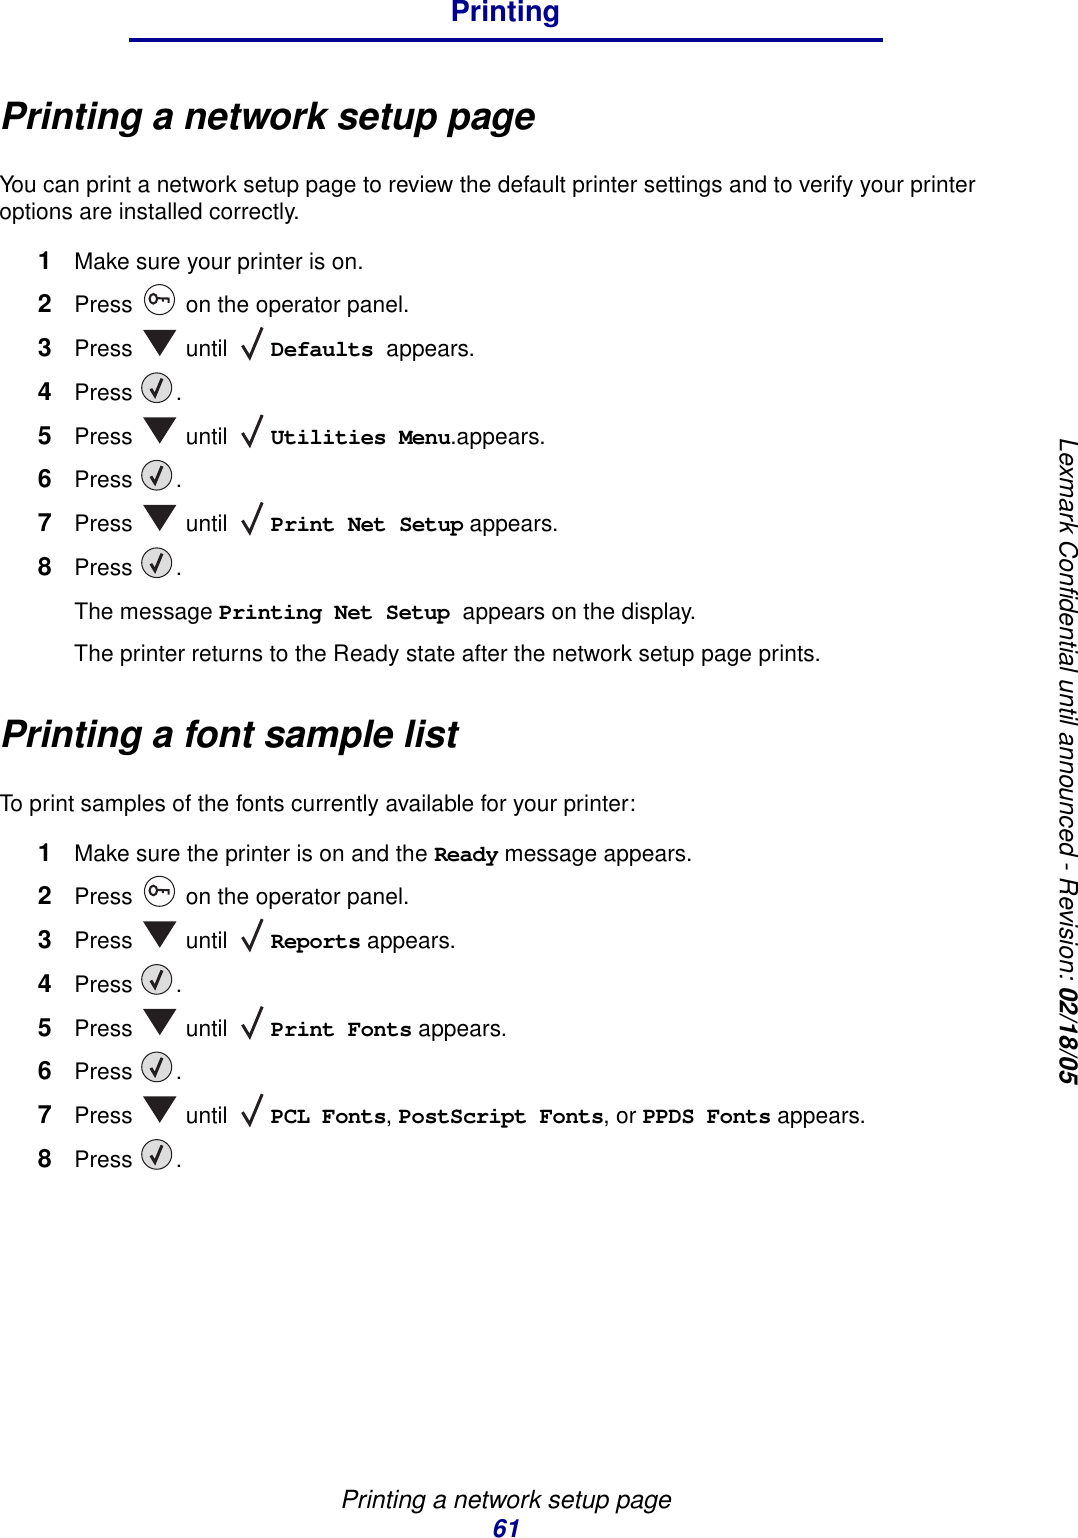 Printing a network setup page61PrintingLexmark Confidential until announced - Revision: 02/18/05Printing a network setup pageYou can print a network setup page to review the default printer settings and to verify your printer options are installed correctly.1Make sure your printer is on.2Press   on the operator panel.3Press  until Defaults appears.4Press .5Press  until Utilities Menu.appears.6Press .7Press  until Print Net Setup appears.8Press .The message Printing Net Setup appears on the display.The printer returns to the Ready state after the network setup page prints.Printing a font sample listTo print samples of the fonts currently available for your printer:1Make sure the printer is on and the Ready message appears.2Press   on the operator panel.3Press  until Reports appears.4Press .5Press  until Print Fonts appears.6Press .7Press  until PCL Fonts, PostScript Fonts, or PPDS Fonts appears.8Press .